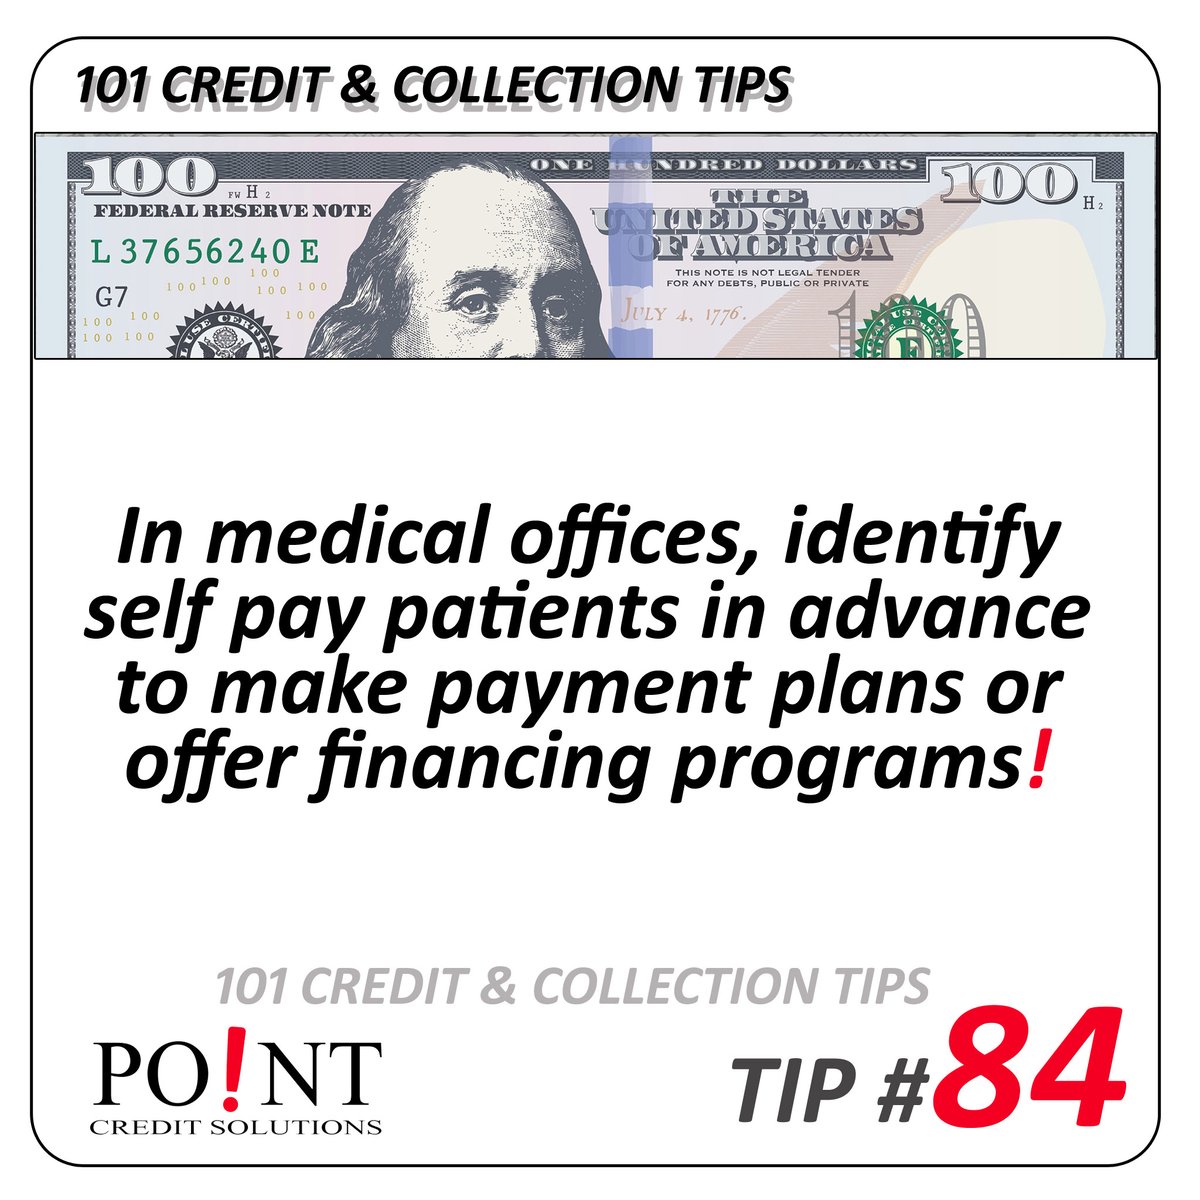 Find more tips here -> zcu.io/PmSO
#PointCredit #CollectionTips #Debt #DebtCollection #MedicalDebt #PaymentPlans